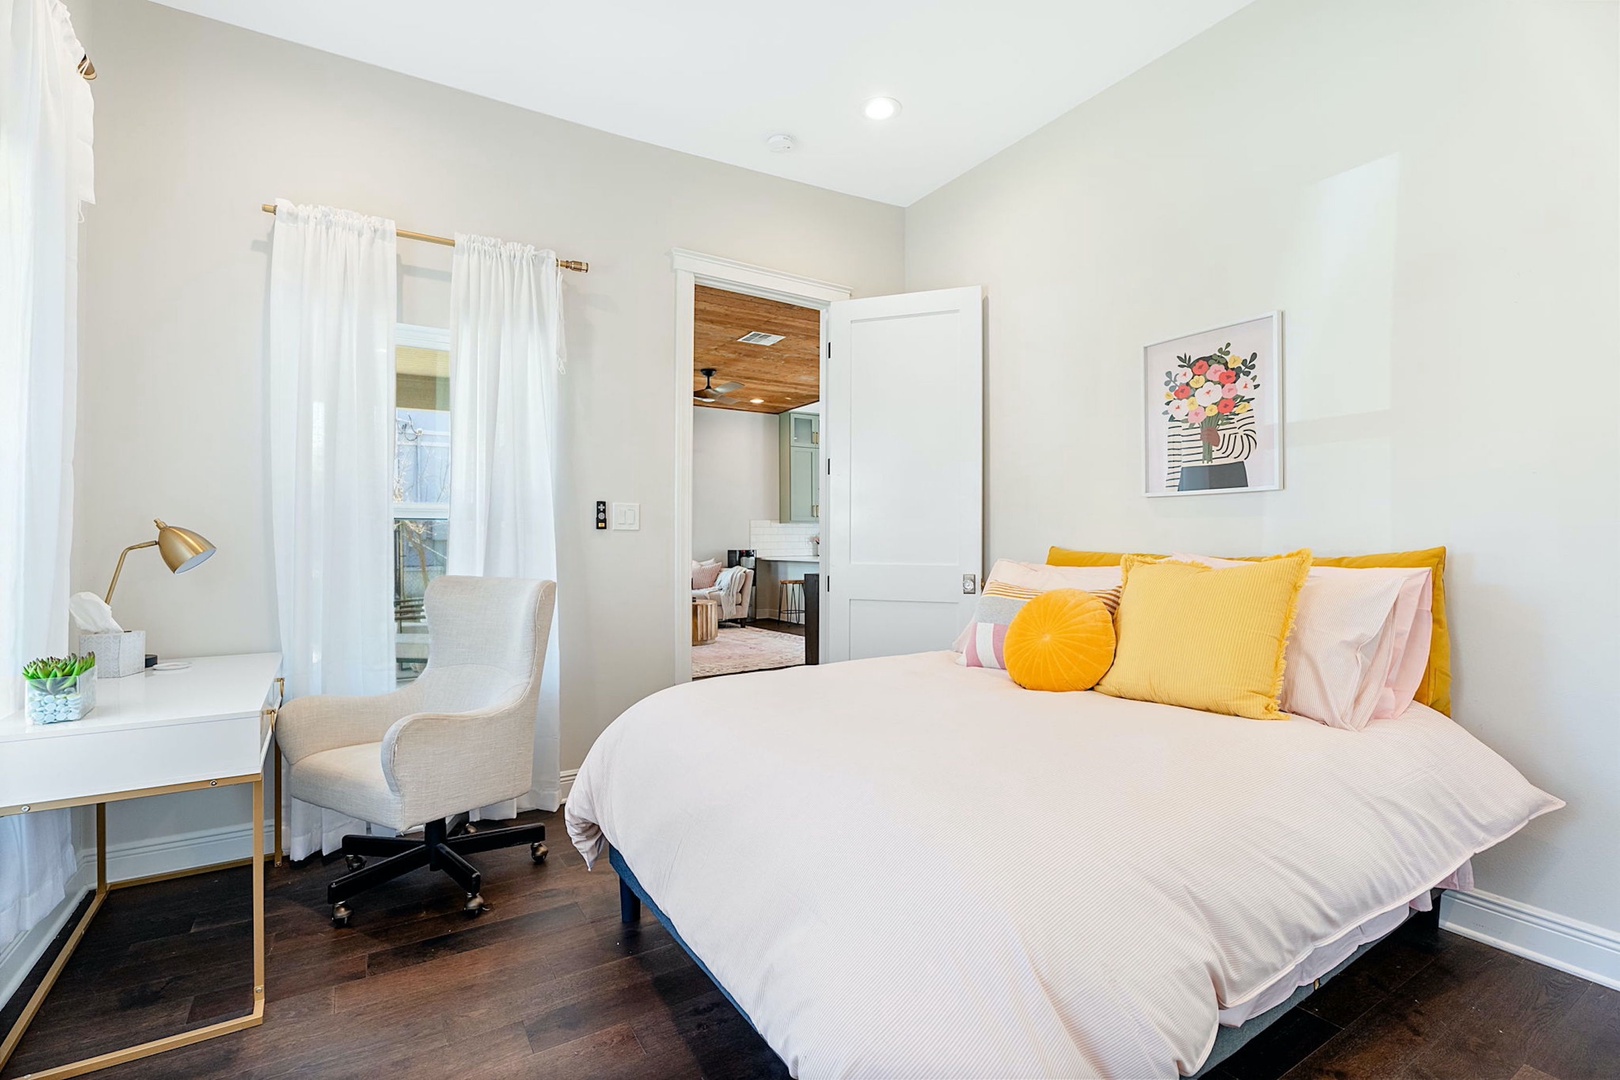 Unwind in the first bedroom, complete with queen bed, desk & closet